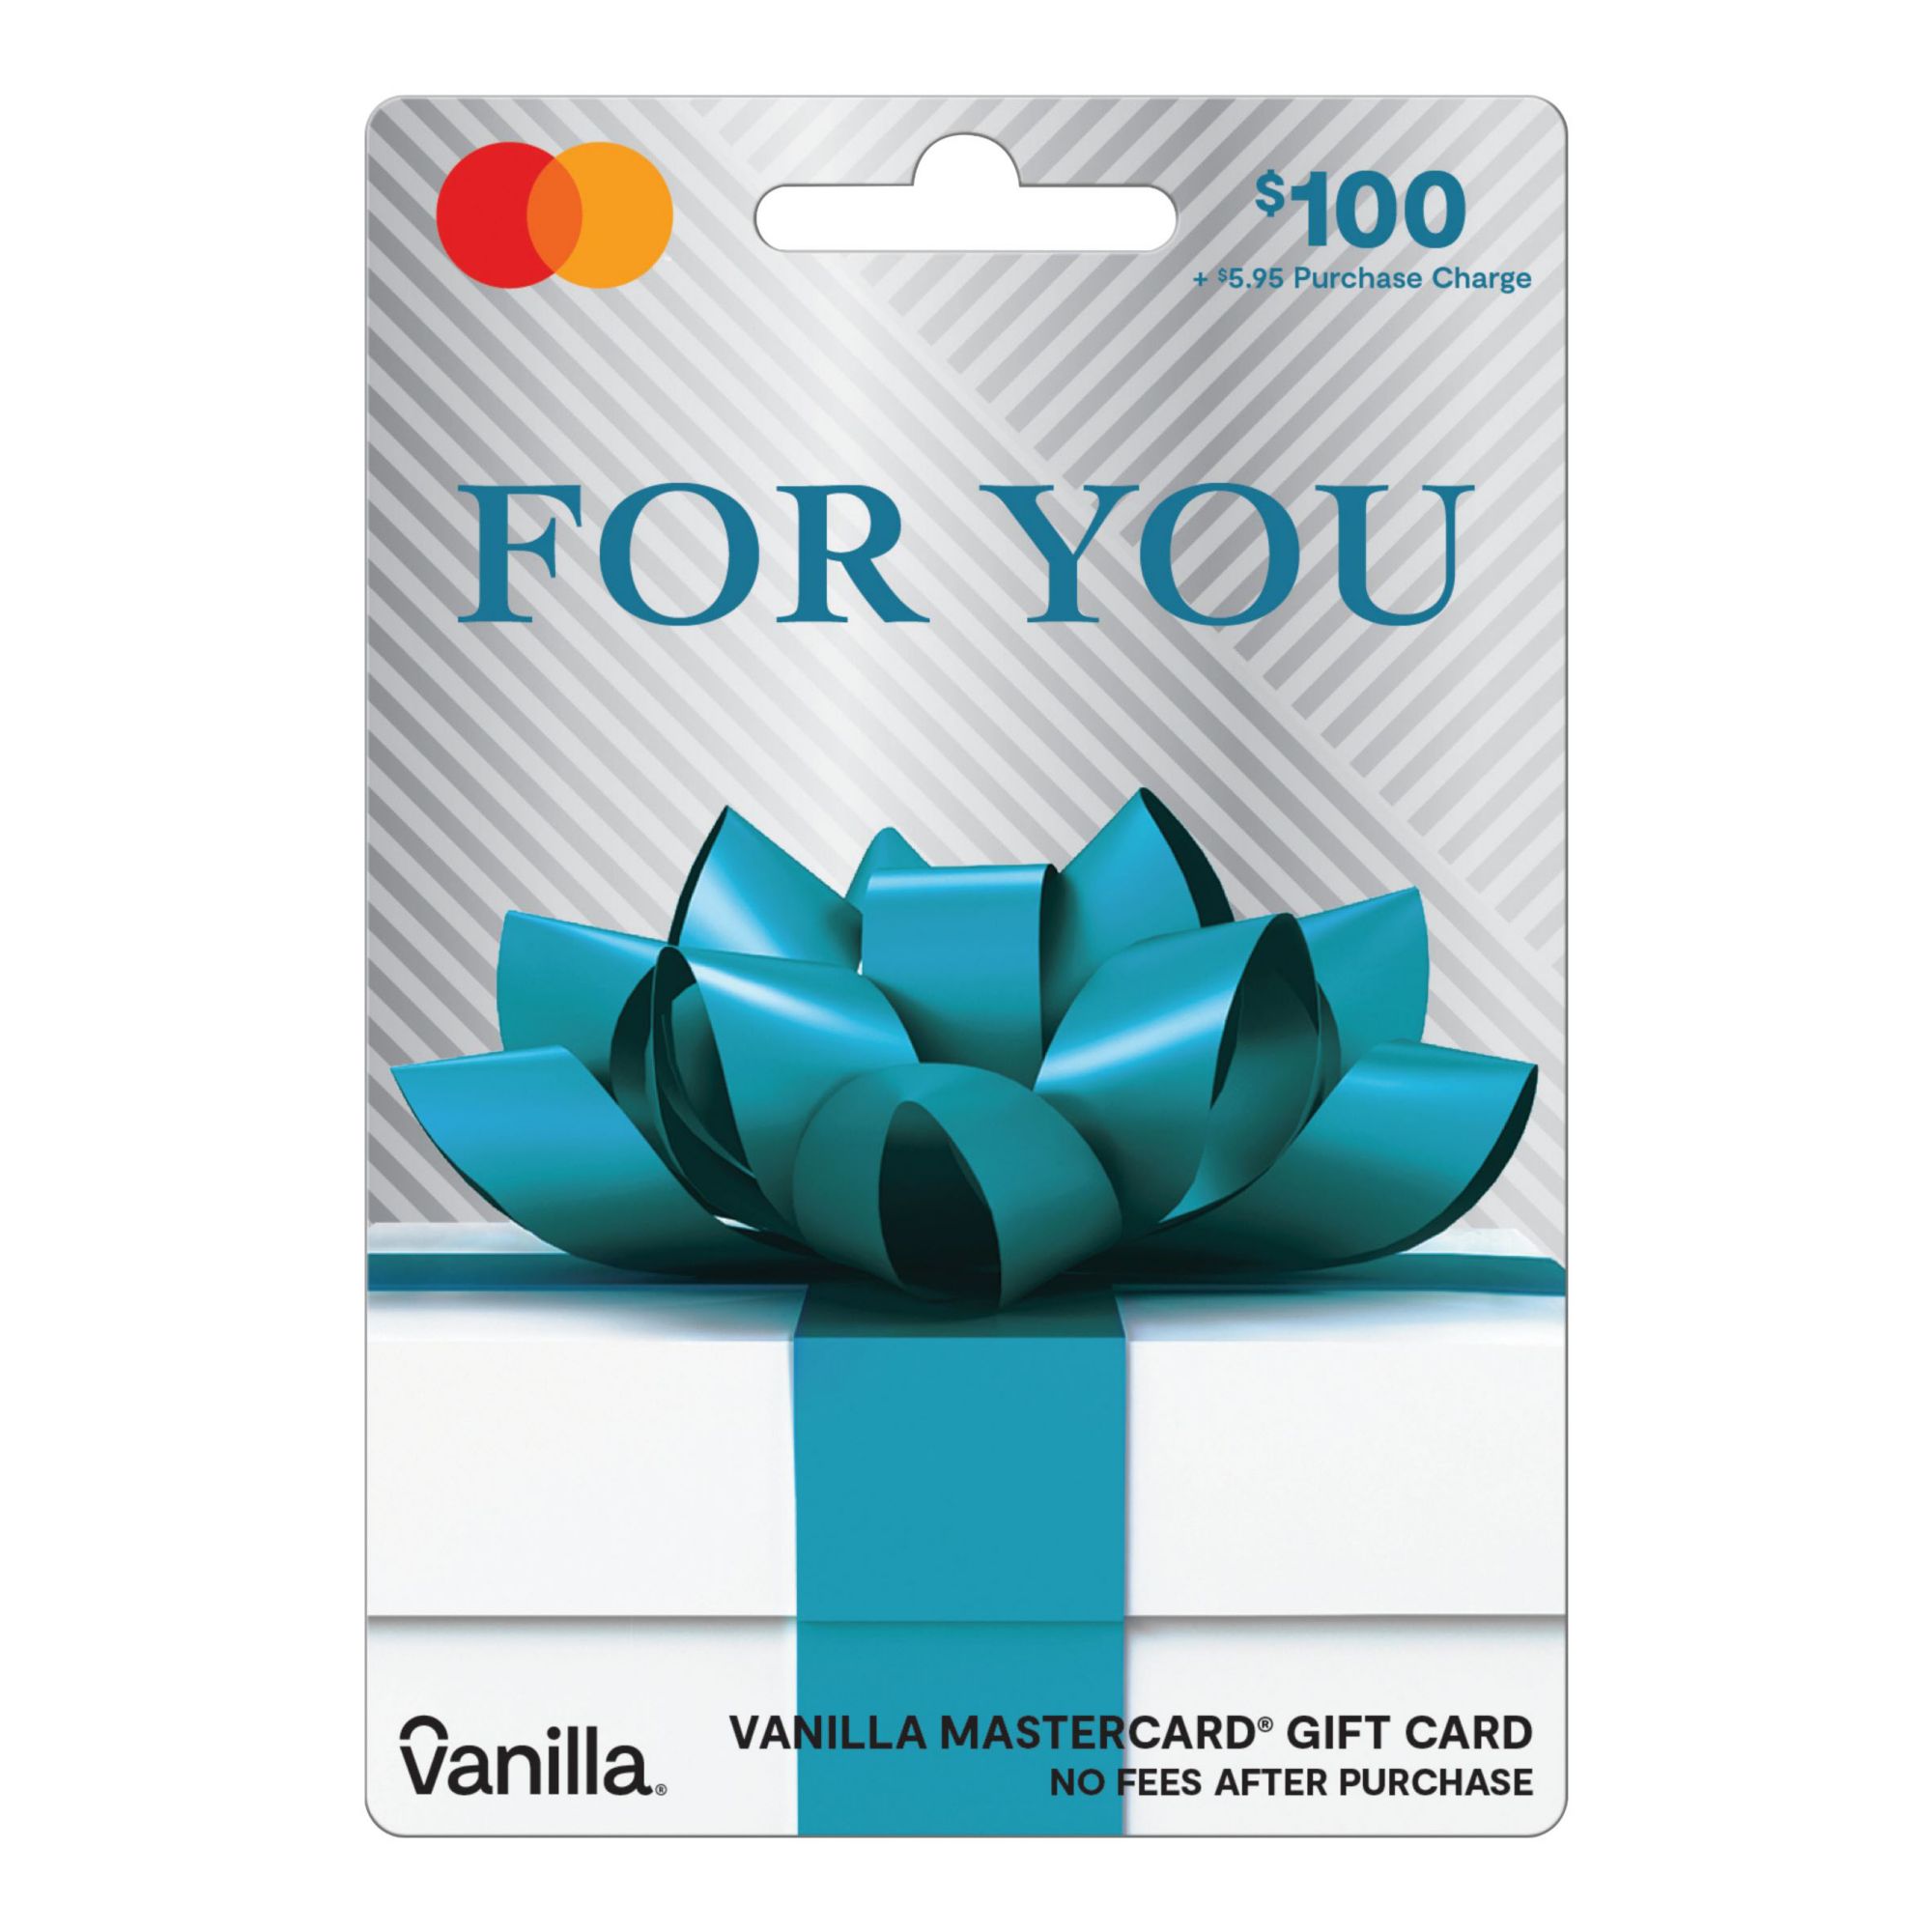 Activate Your Visa or Mastercard Gift Card